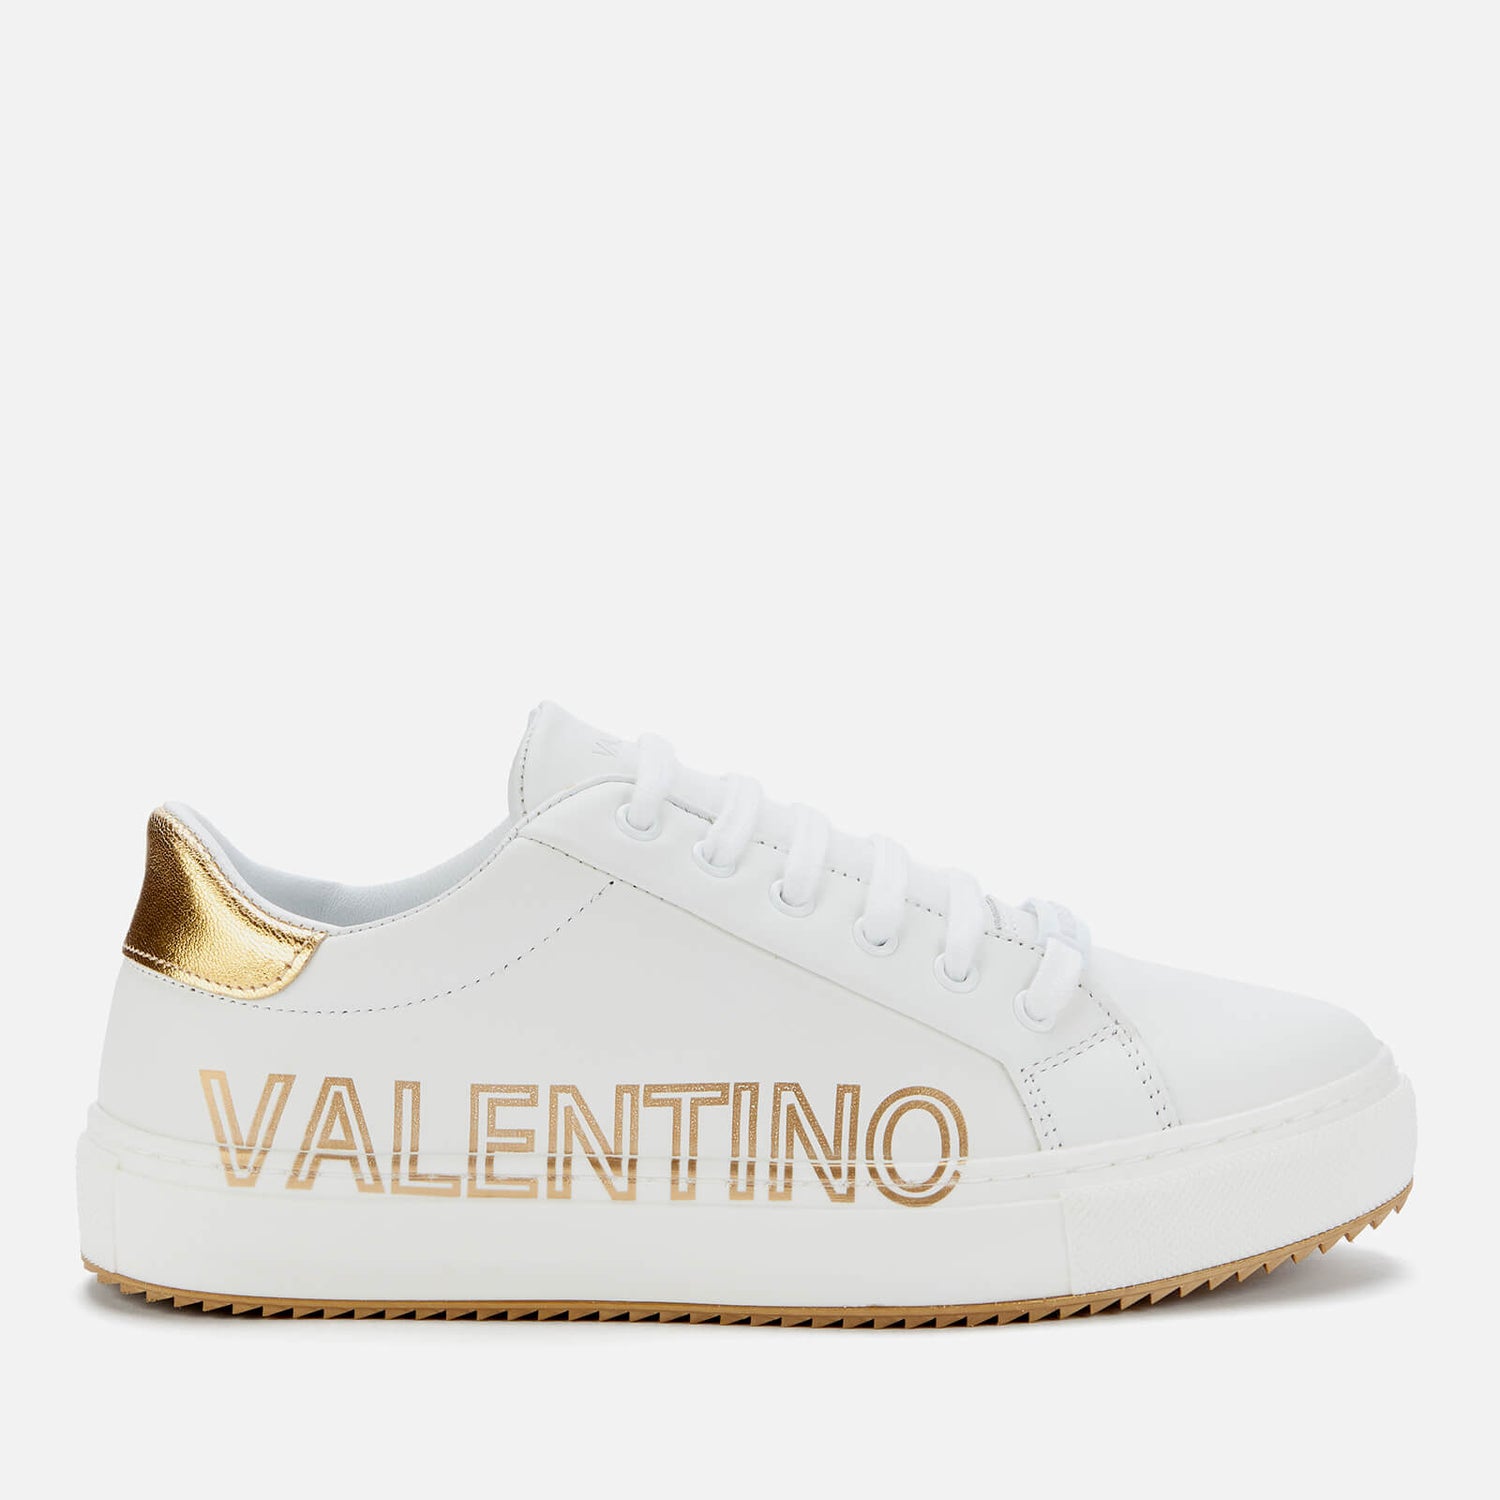 Valentino Women's Leather Low Top Trainers - White/Gold